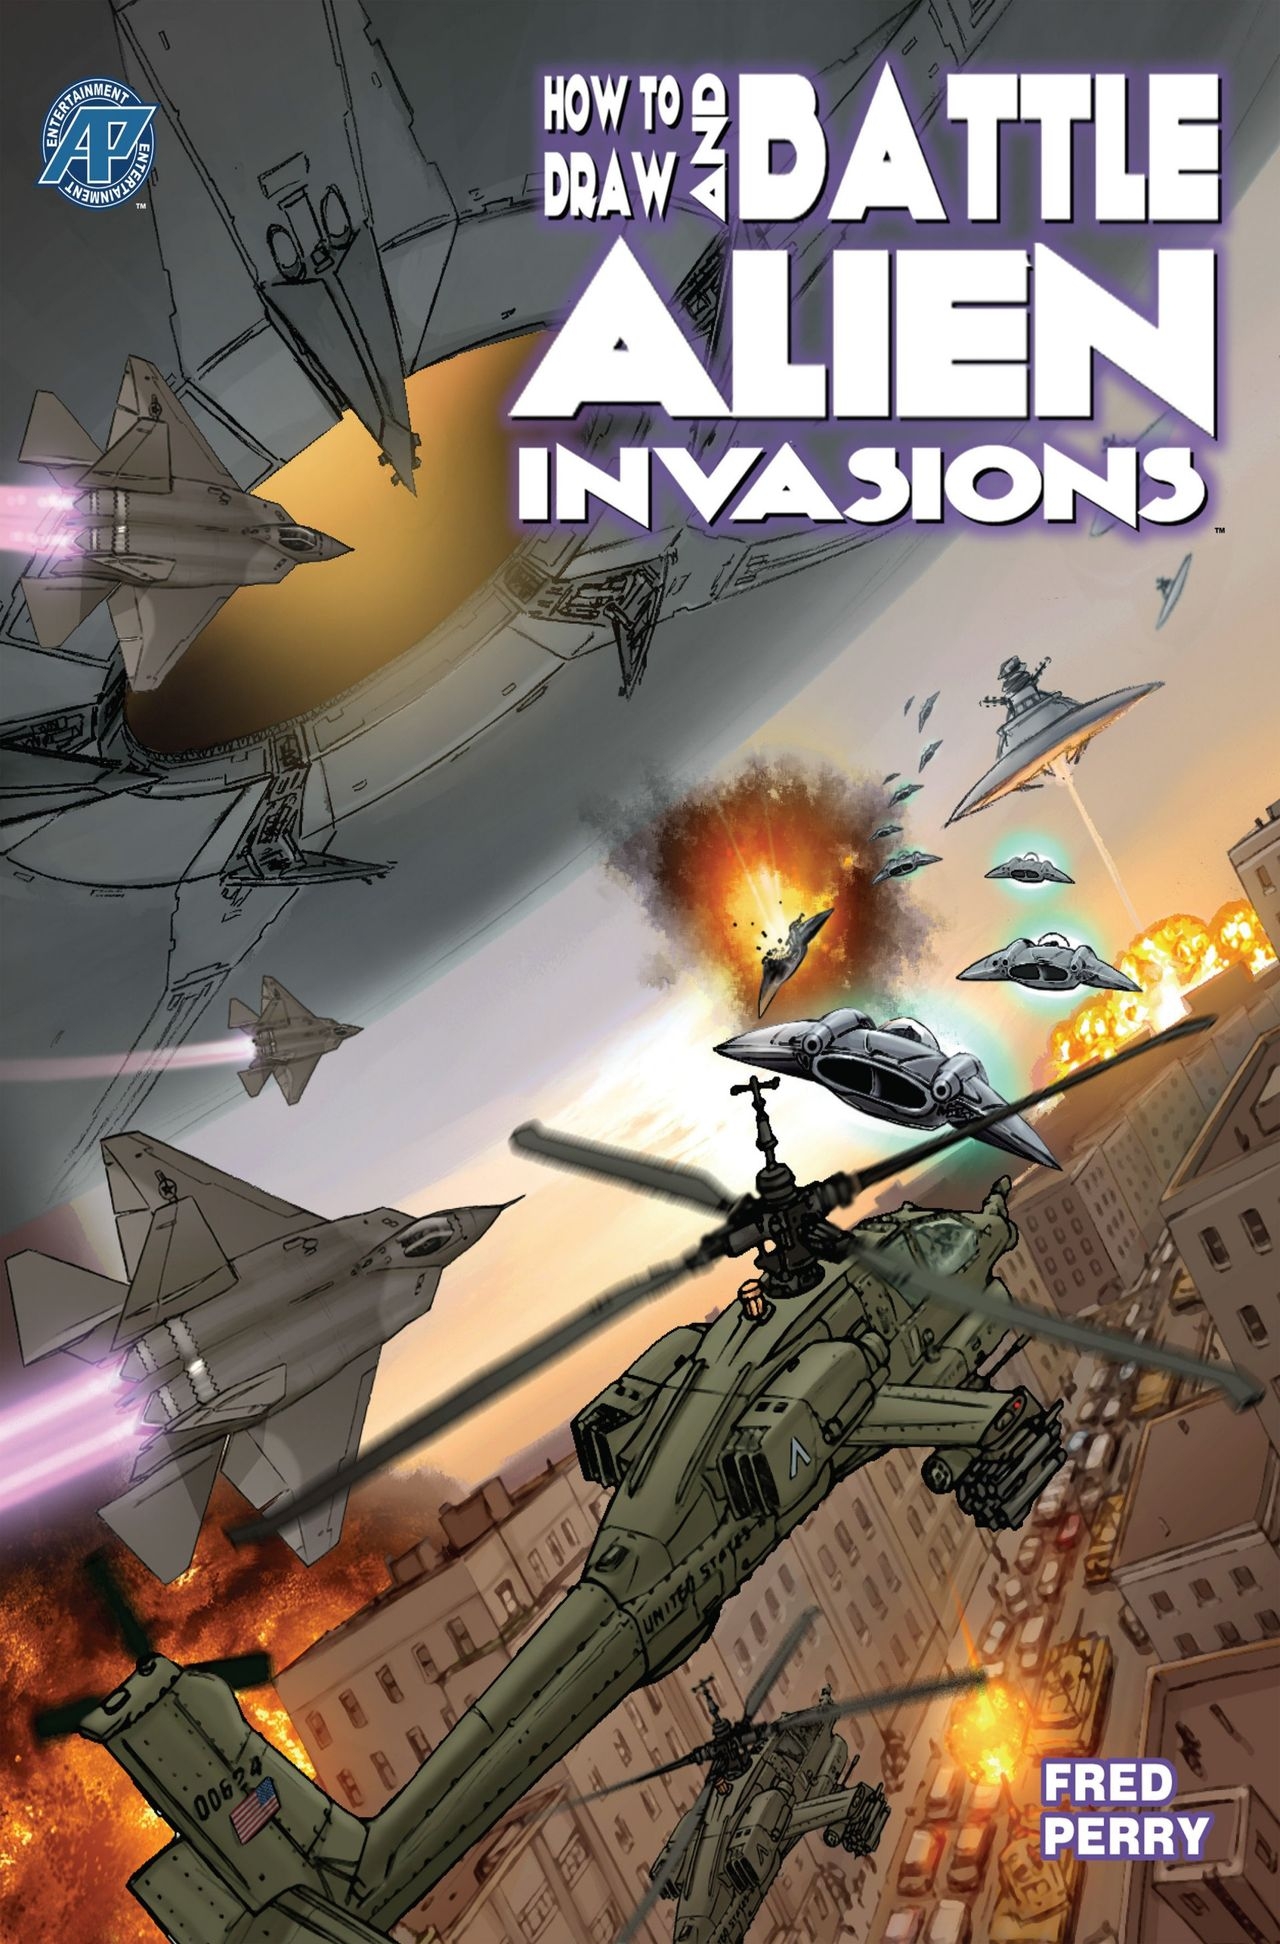 How To Draw And Battle Alien Invasions(2012) 0